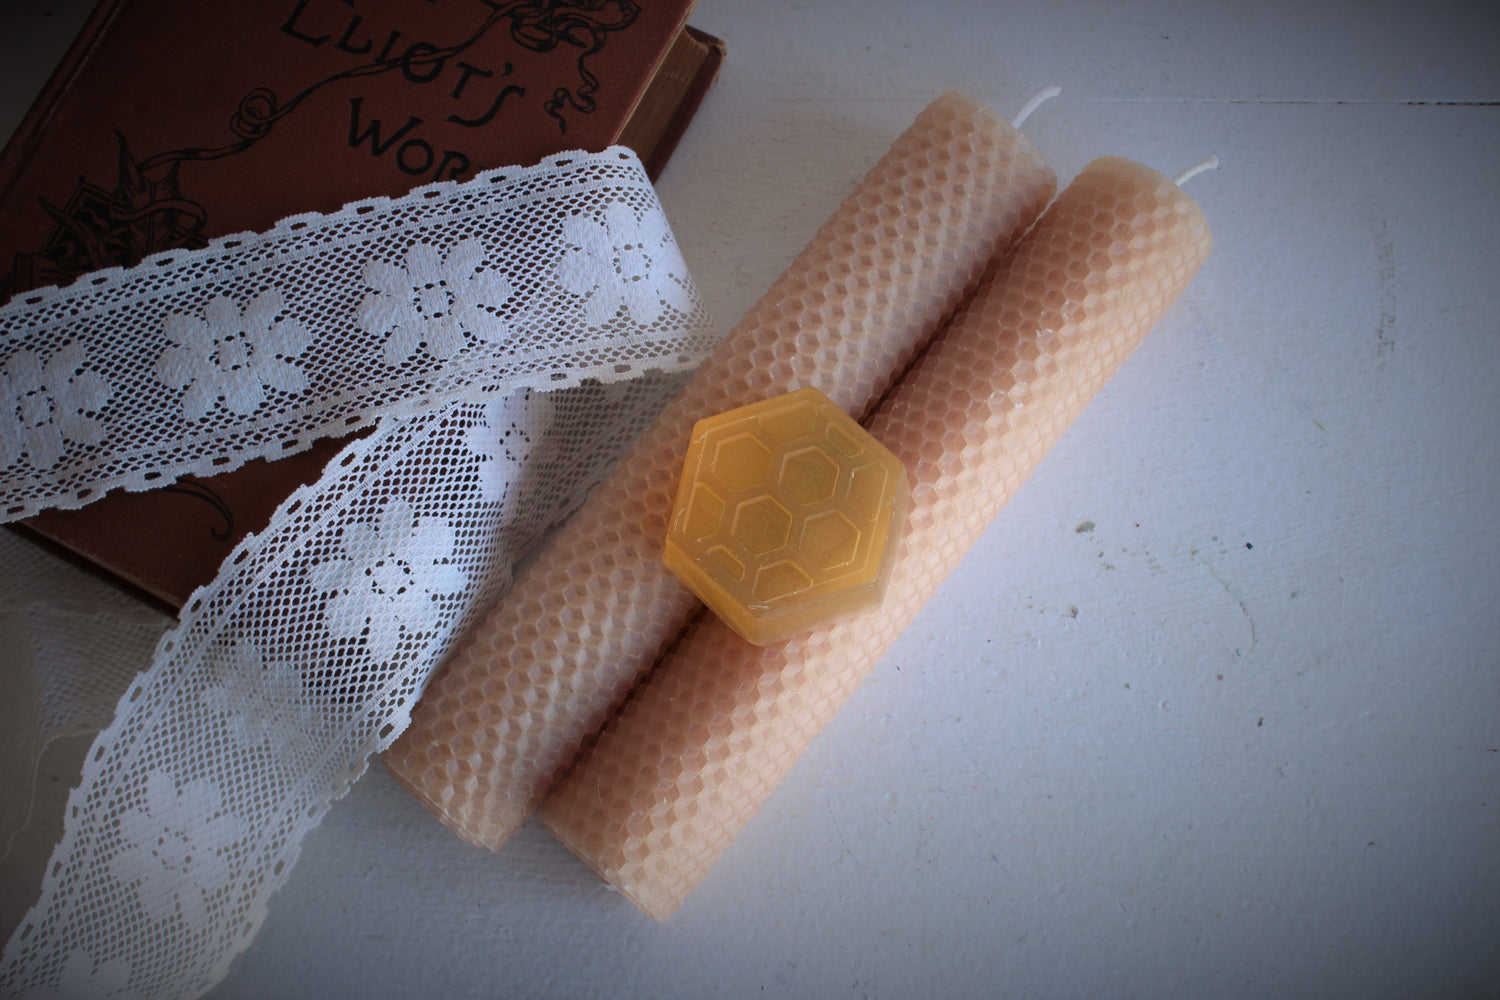 "The Bees Knees" Handmade Beeswax Candle and Honey Soap Set